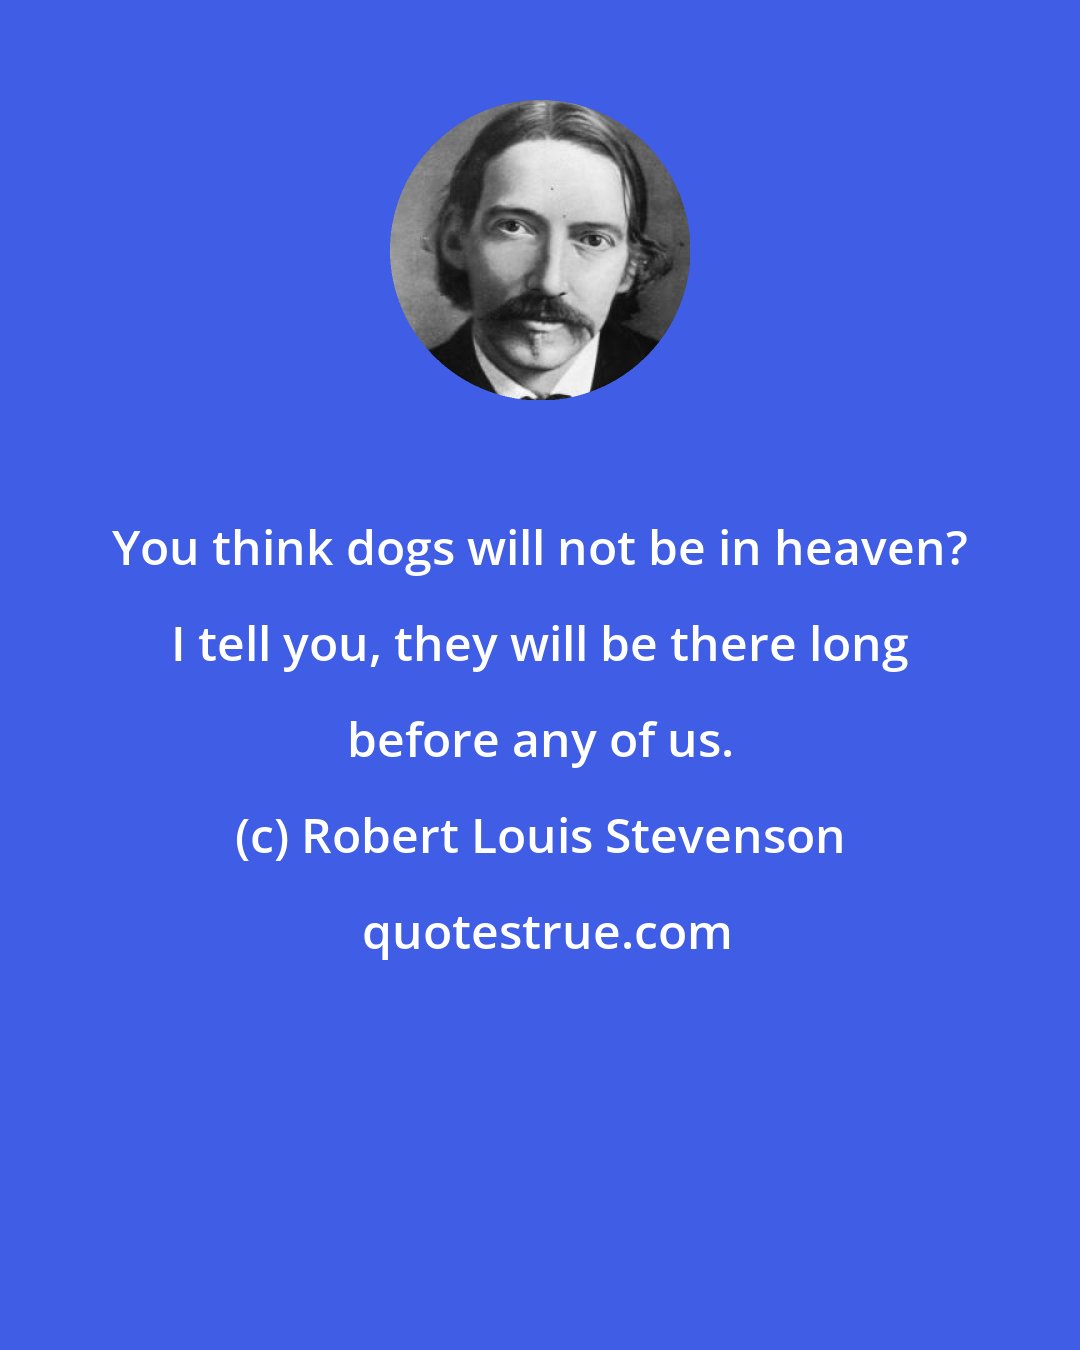 Robert Louis Stevenson: You think dogs will not be in heaven? I tell you, they will be there long before any of us.